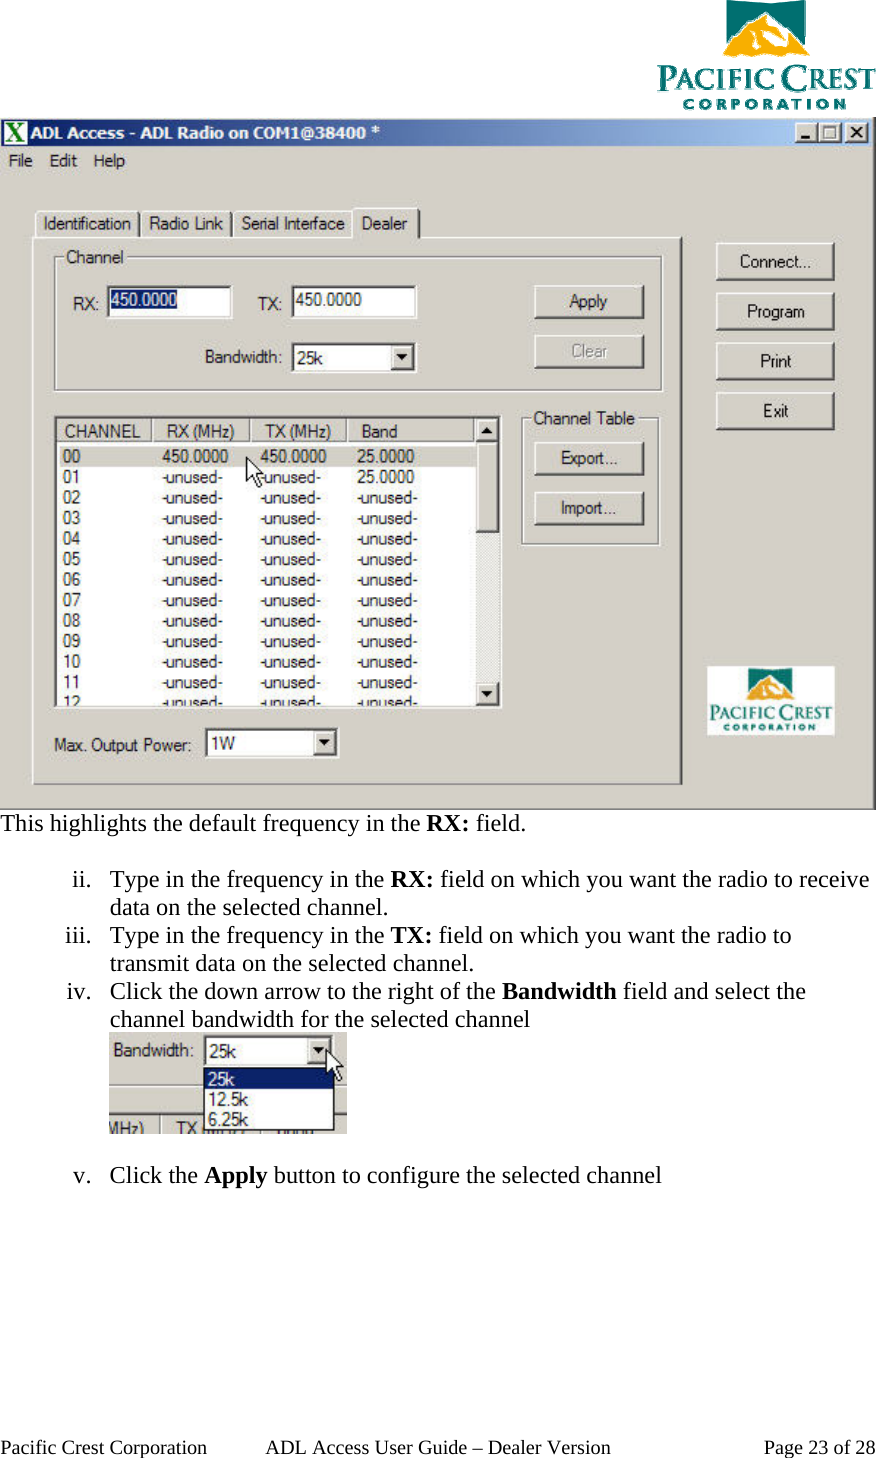  Pacific Crest Corporation  ADL Access User Guide – Dealer Version  Page 23 of 28  This highlights the default frequency in the RX: field.  ii. Type in the frequency in the RX: field on which you want the radio to receive data on the selected channel. iii. Type in the frequency in the TX: field on which you want the radio to transmit data on the selected channel. iv. Click the down arrow to the right of the Bandwidth field and select the channel bandwidth for the selected channel   v. Click the Apply button to configure the selected channel 